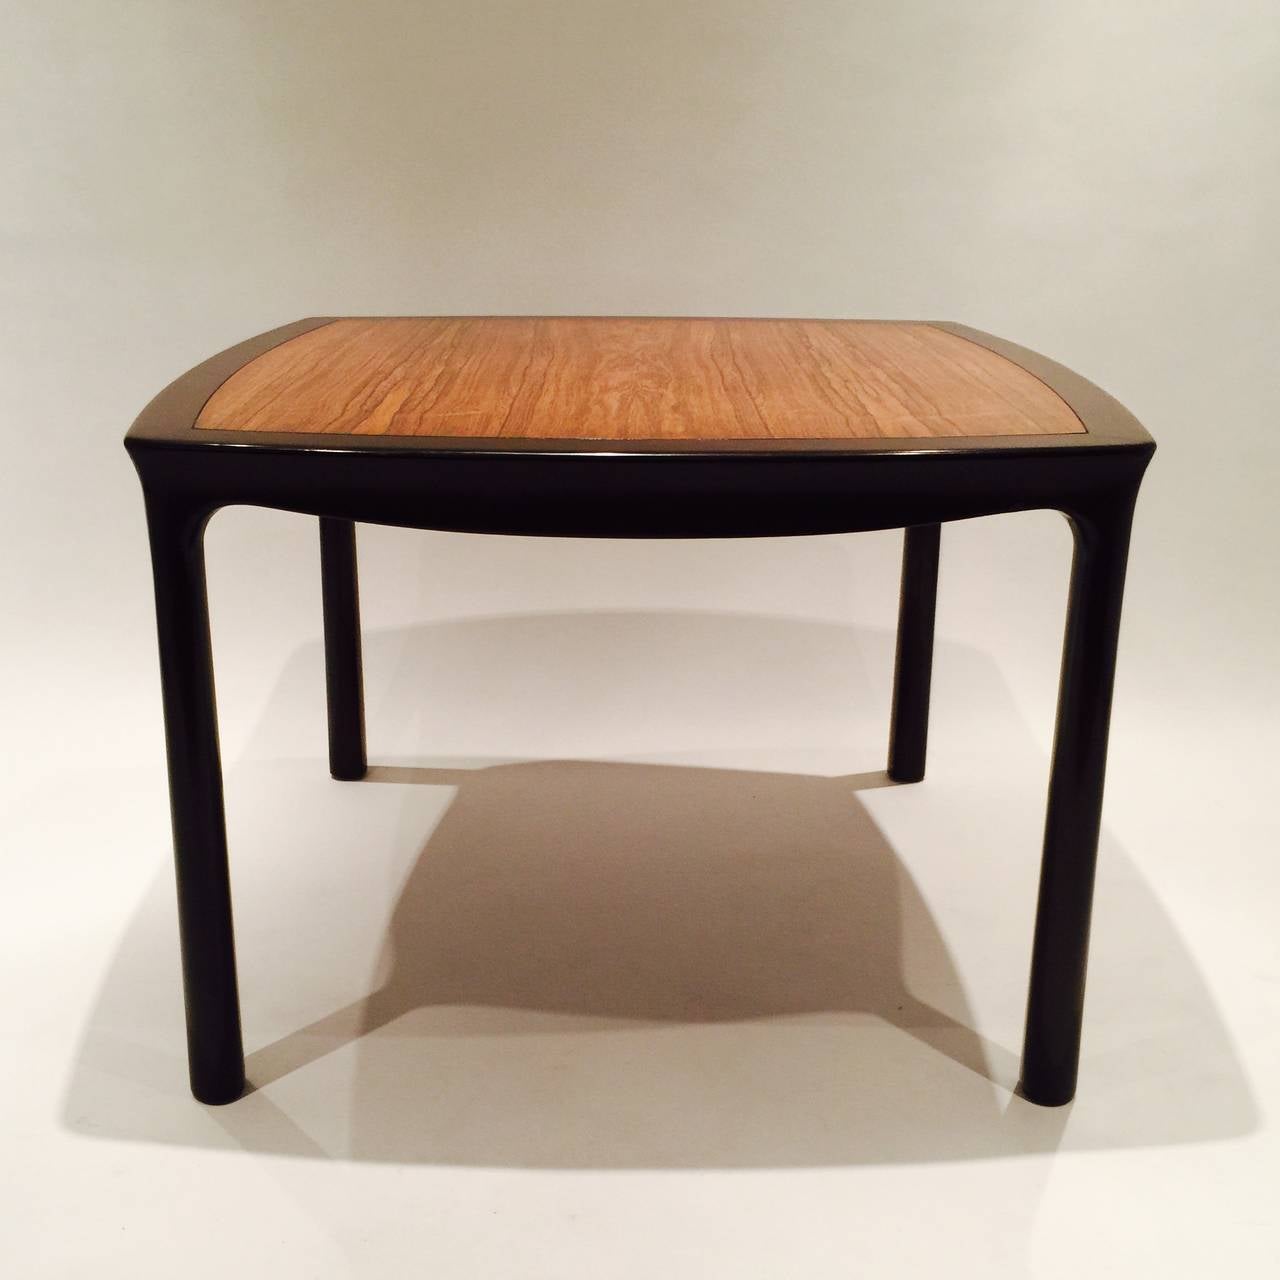 A Pair Of Square, Sculptural Tables In Mahogany With Rosewood Tops By Edward Wormley For Dunbar